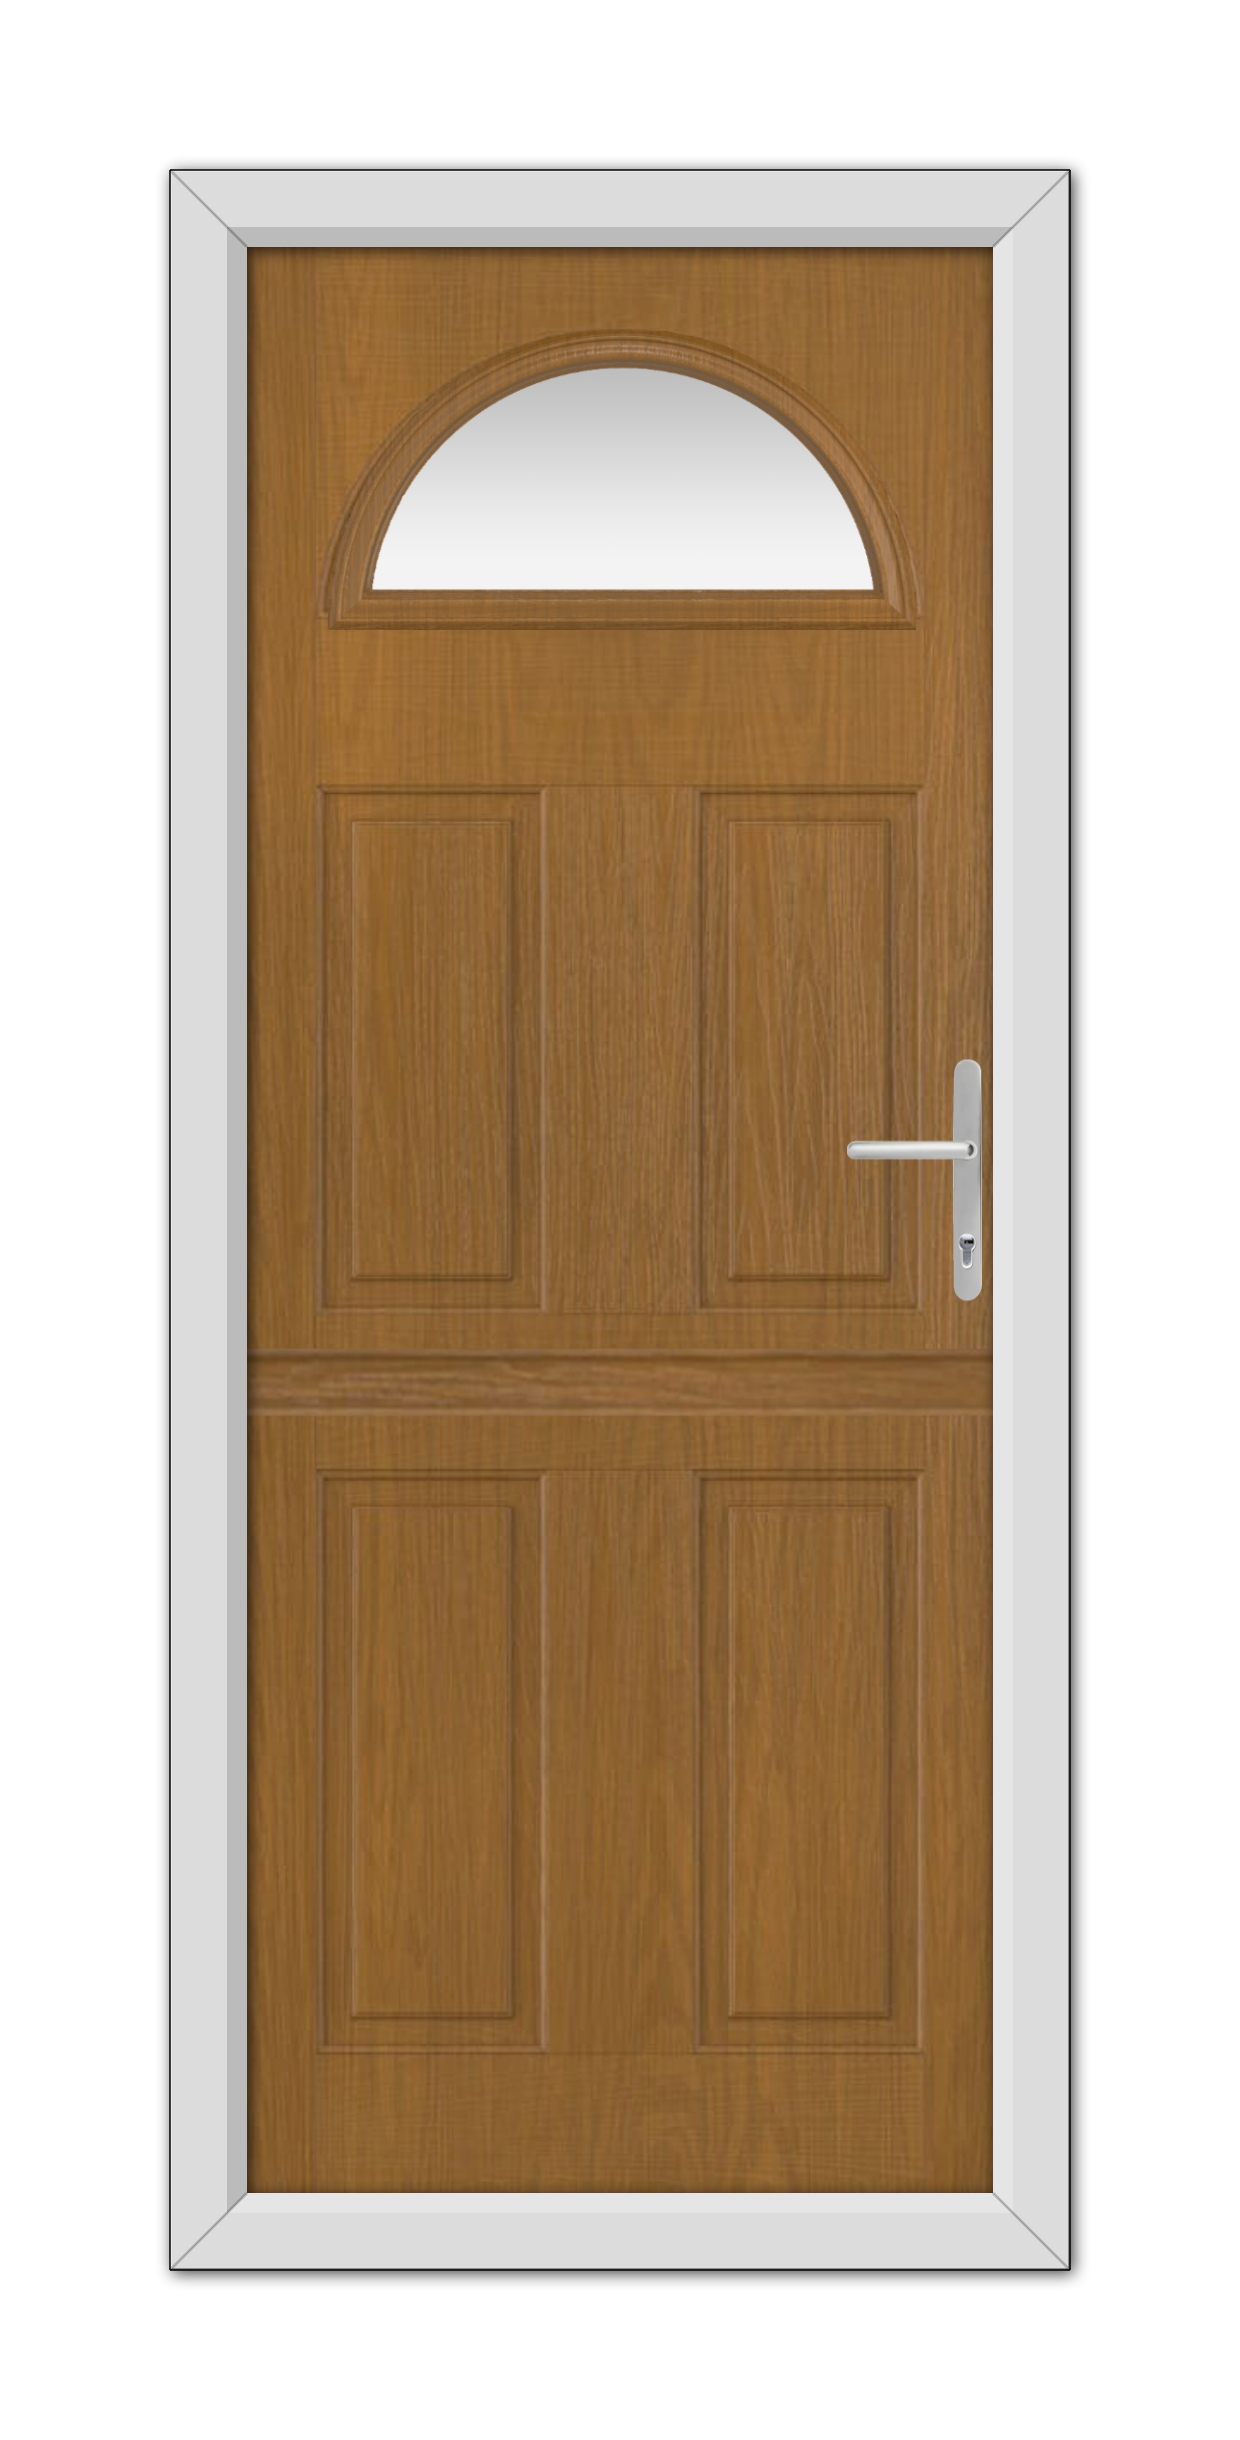 A Oak Winslow 1 Stable Composite Door 48mm Timber Core with a half-circle window at the top and a metal handle, set within a white frame.